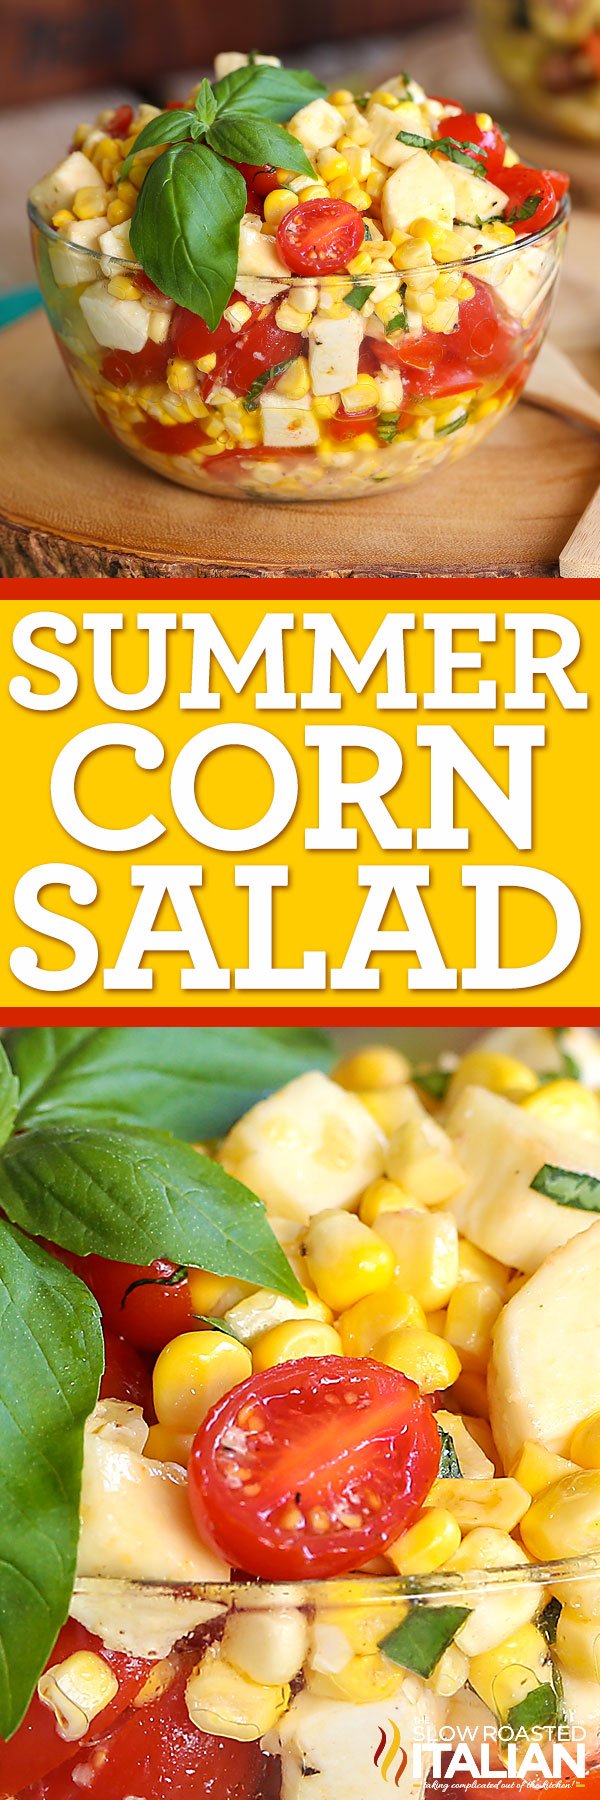 titled image (and shown): Summer Corn Salad